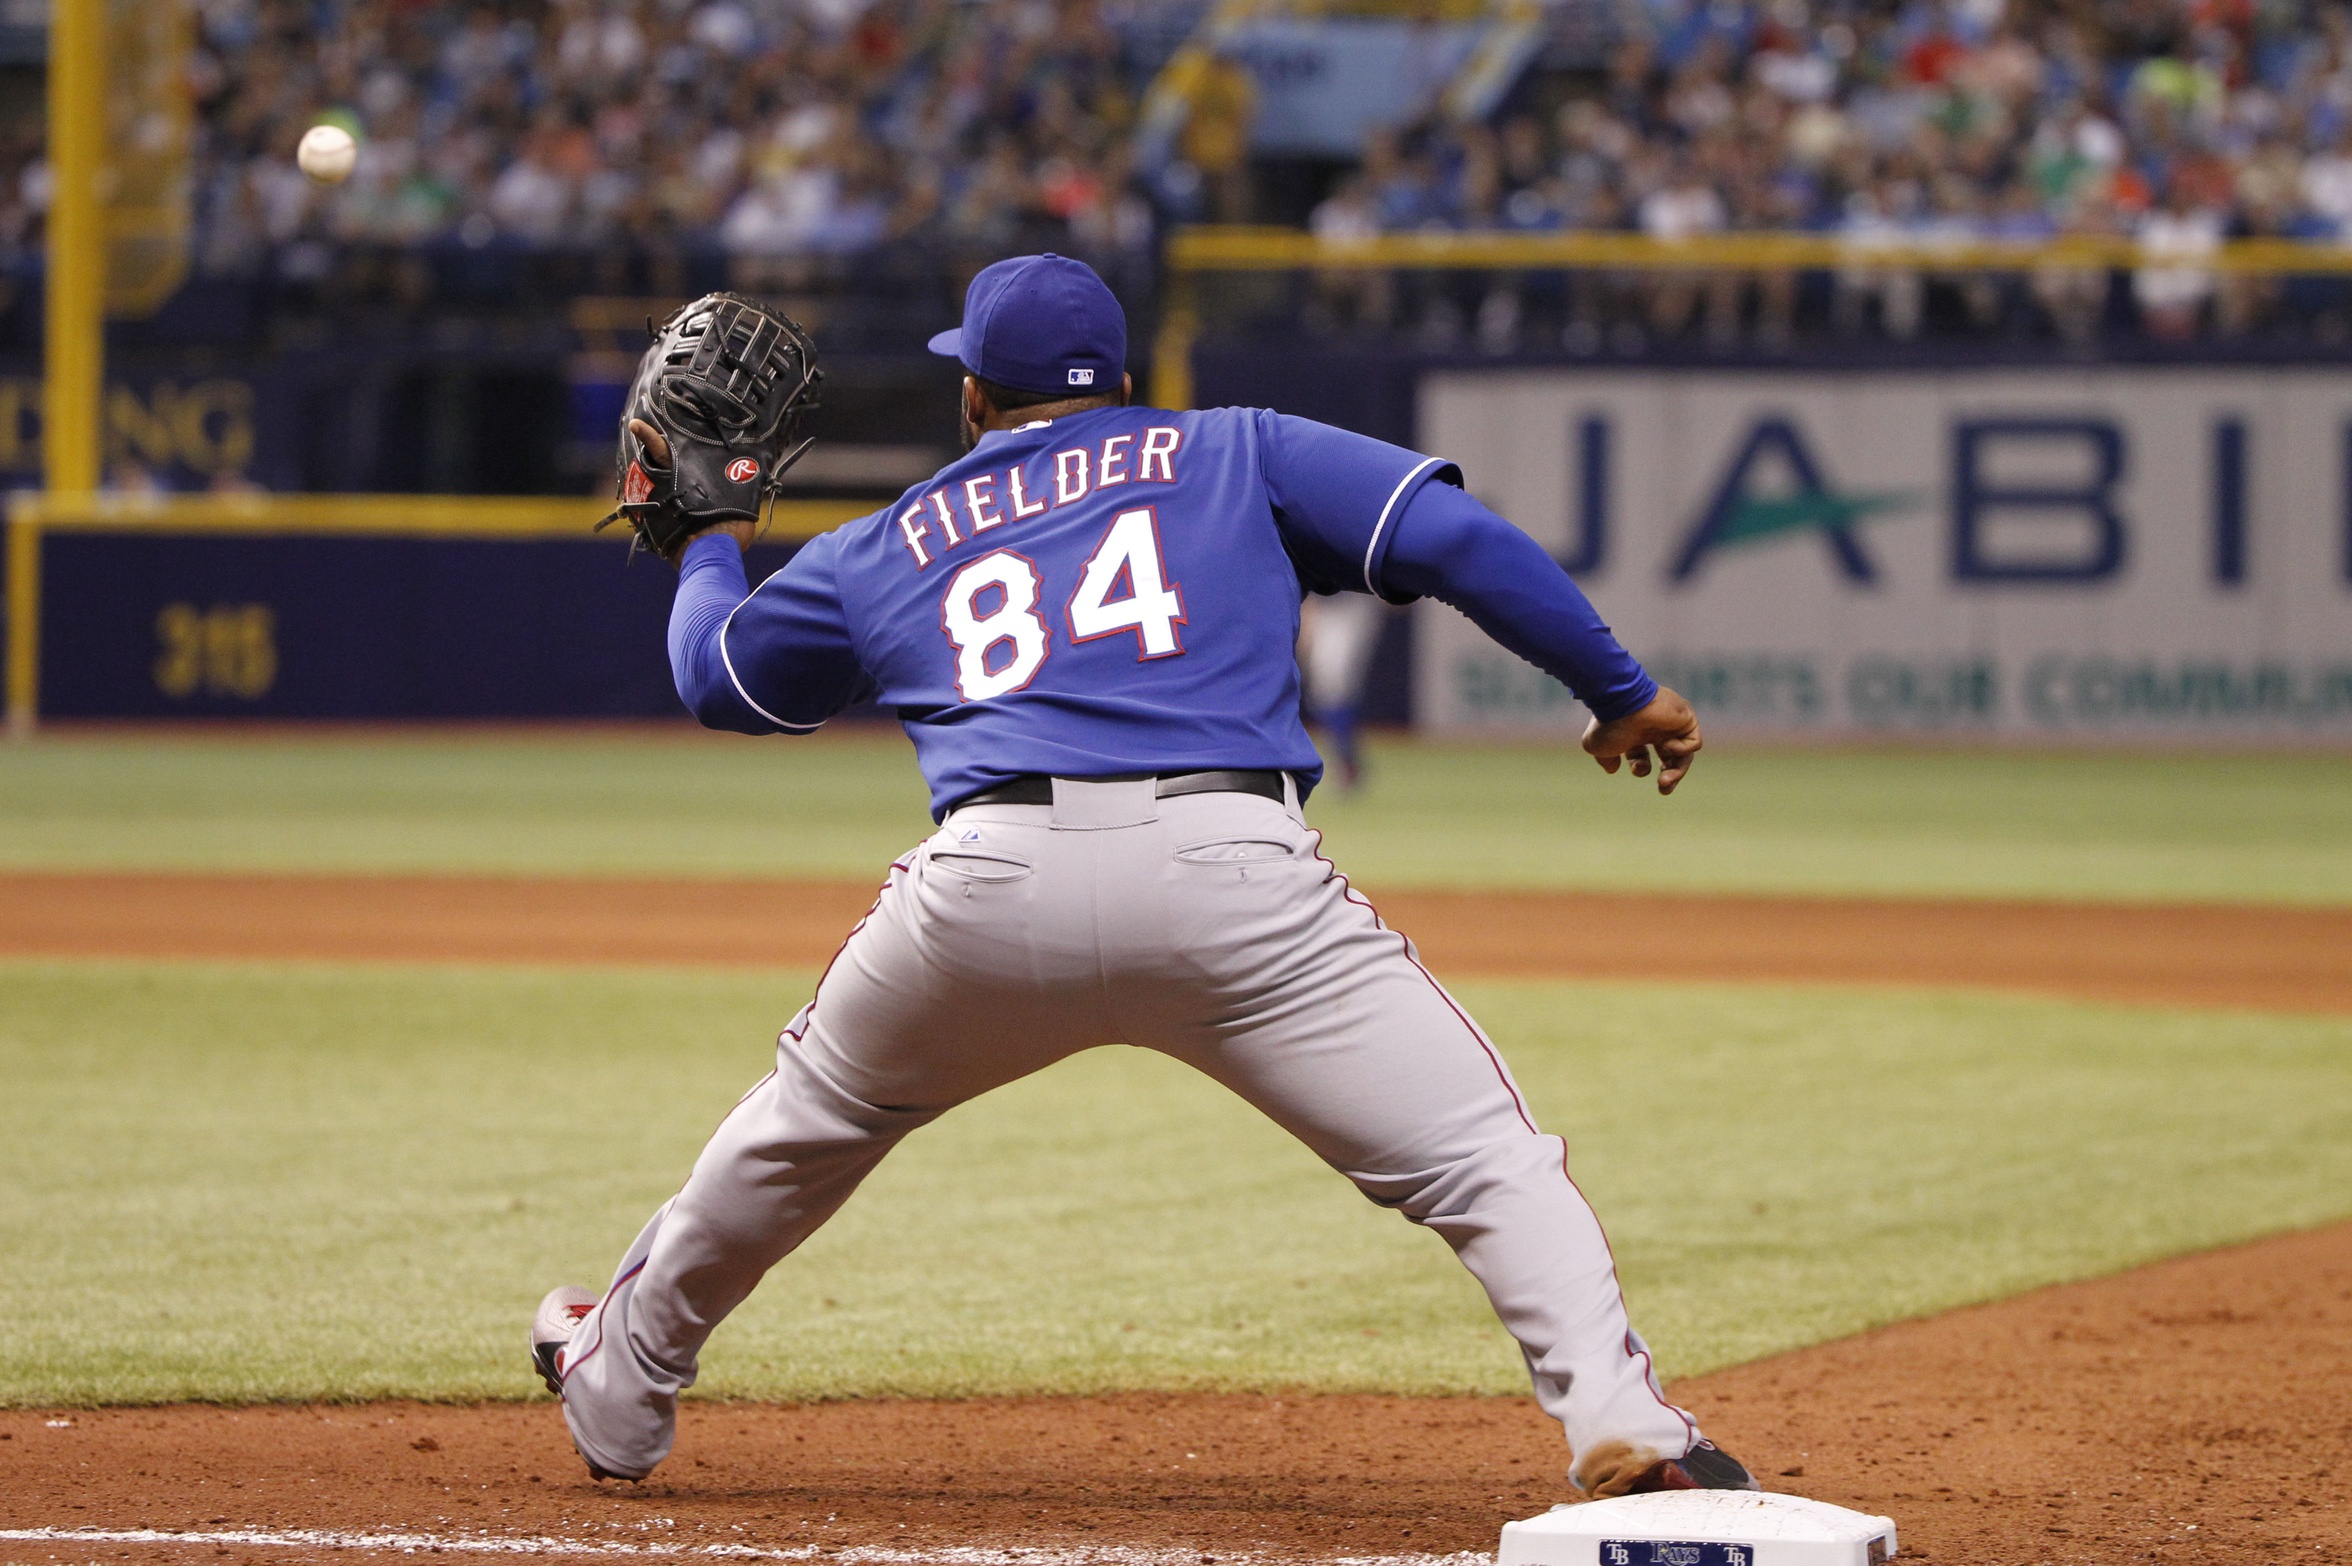 Prince Fielder fields the ball. Pun intended. Photo by Kim Klement, USA Today Sports Images.